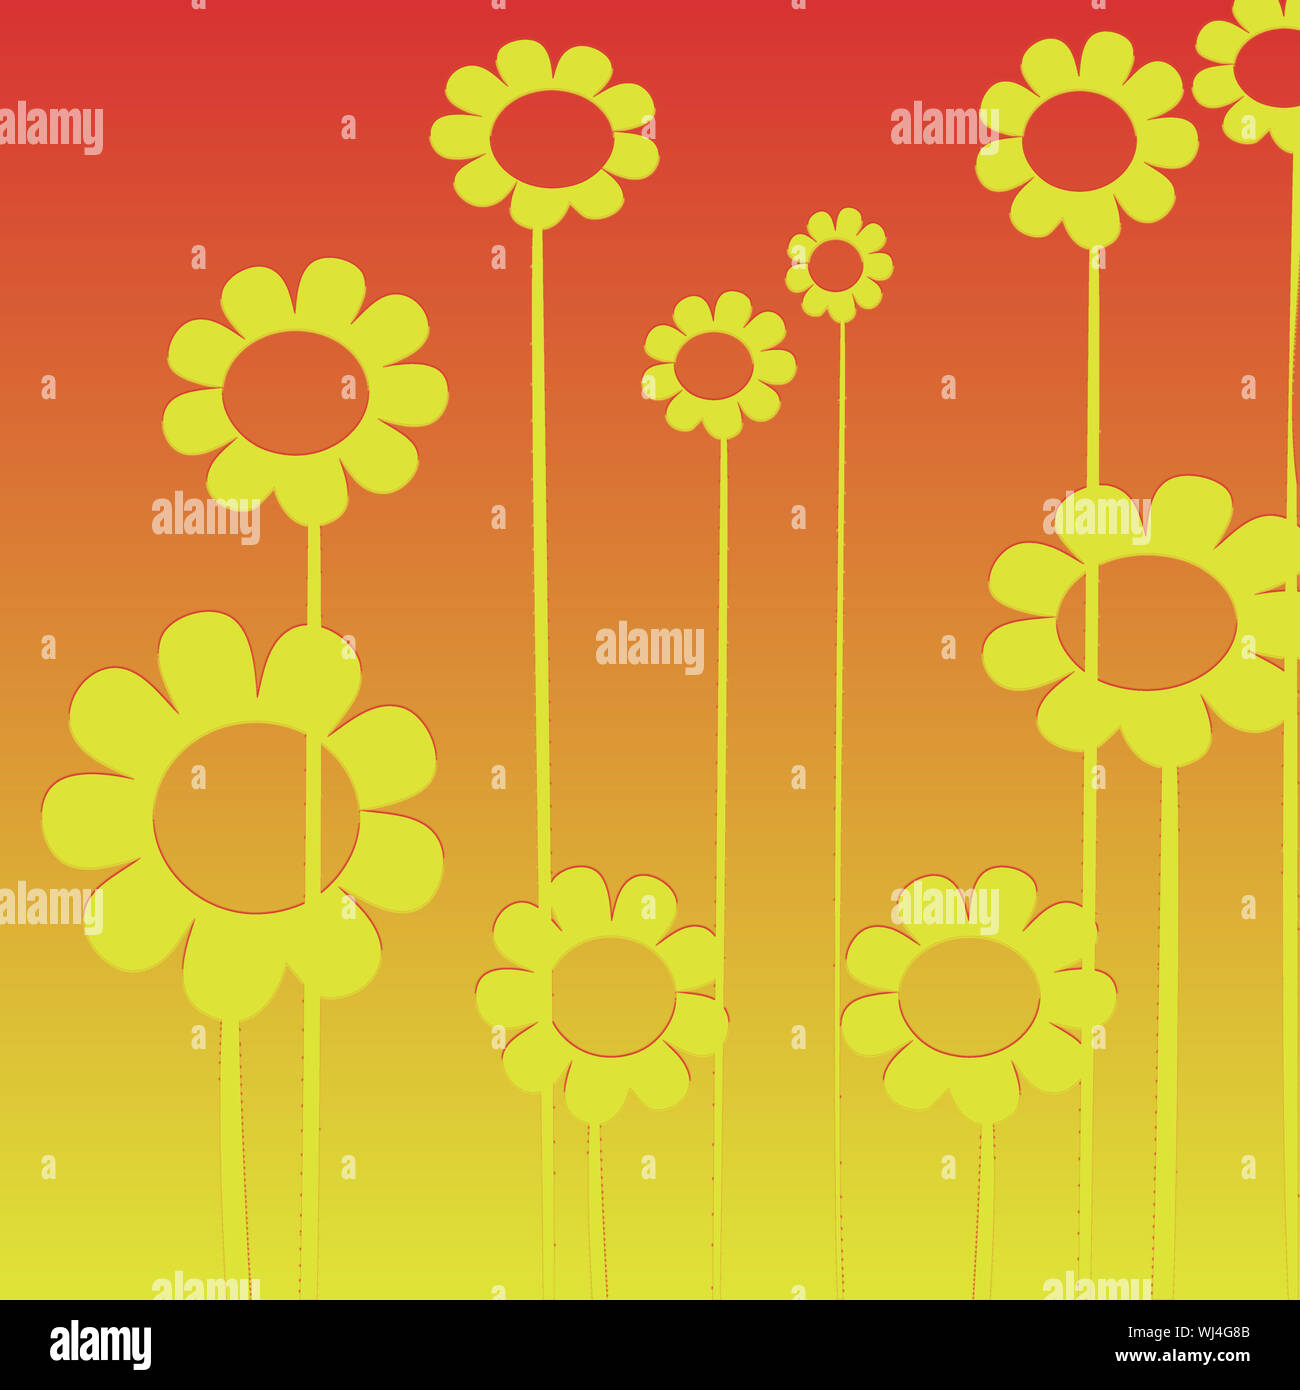 Background illustration with simple stylized flowers, clip art Stock Photo